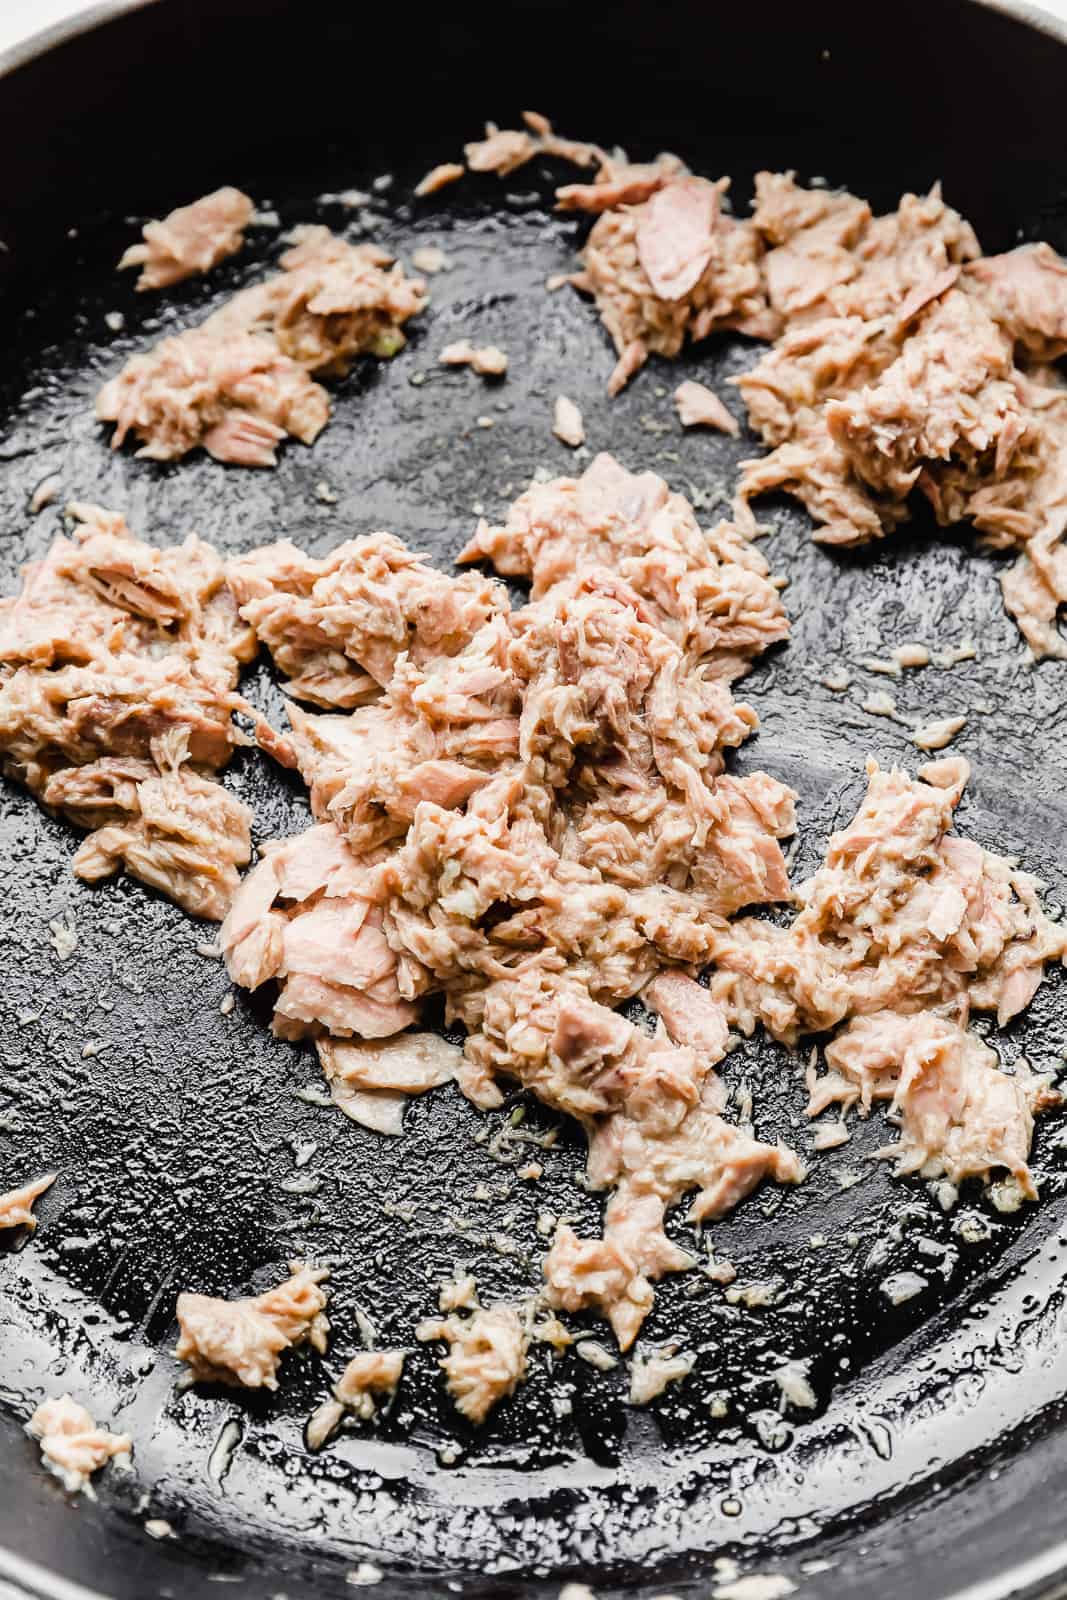 Canned tuna being cooked in a black skillet.